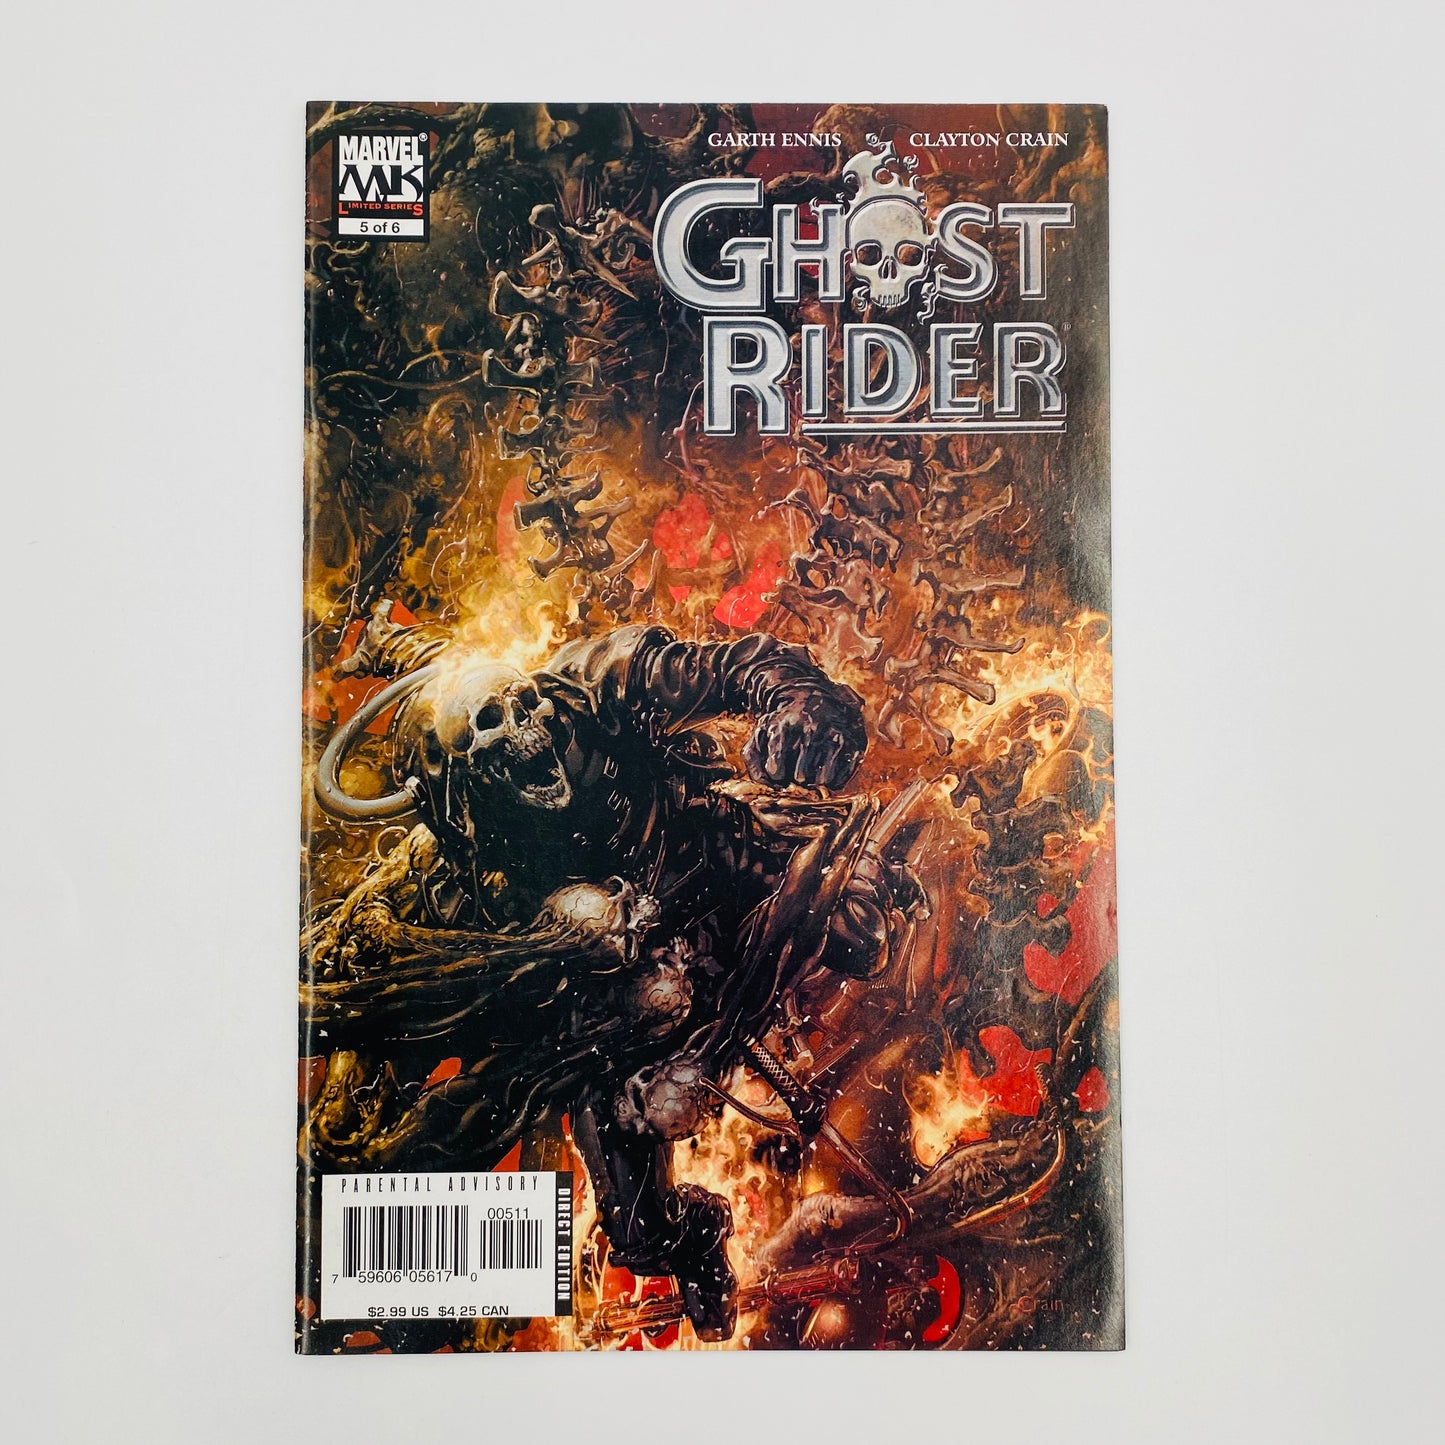 Ghost Rider #1-6 “Road to Damnation” (2005-2006) Marvel Knights